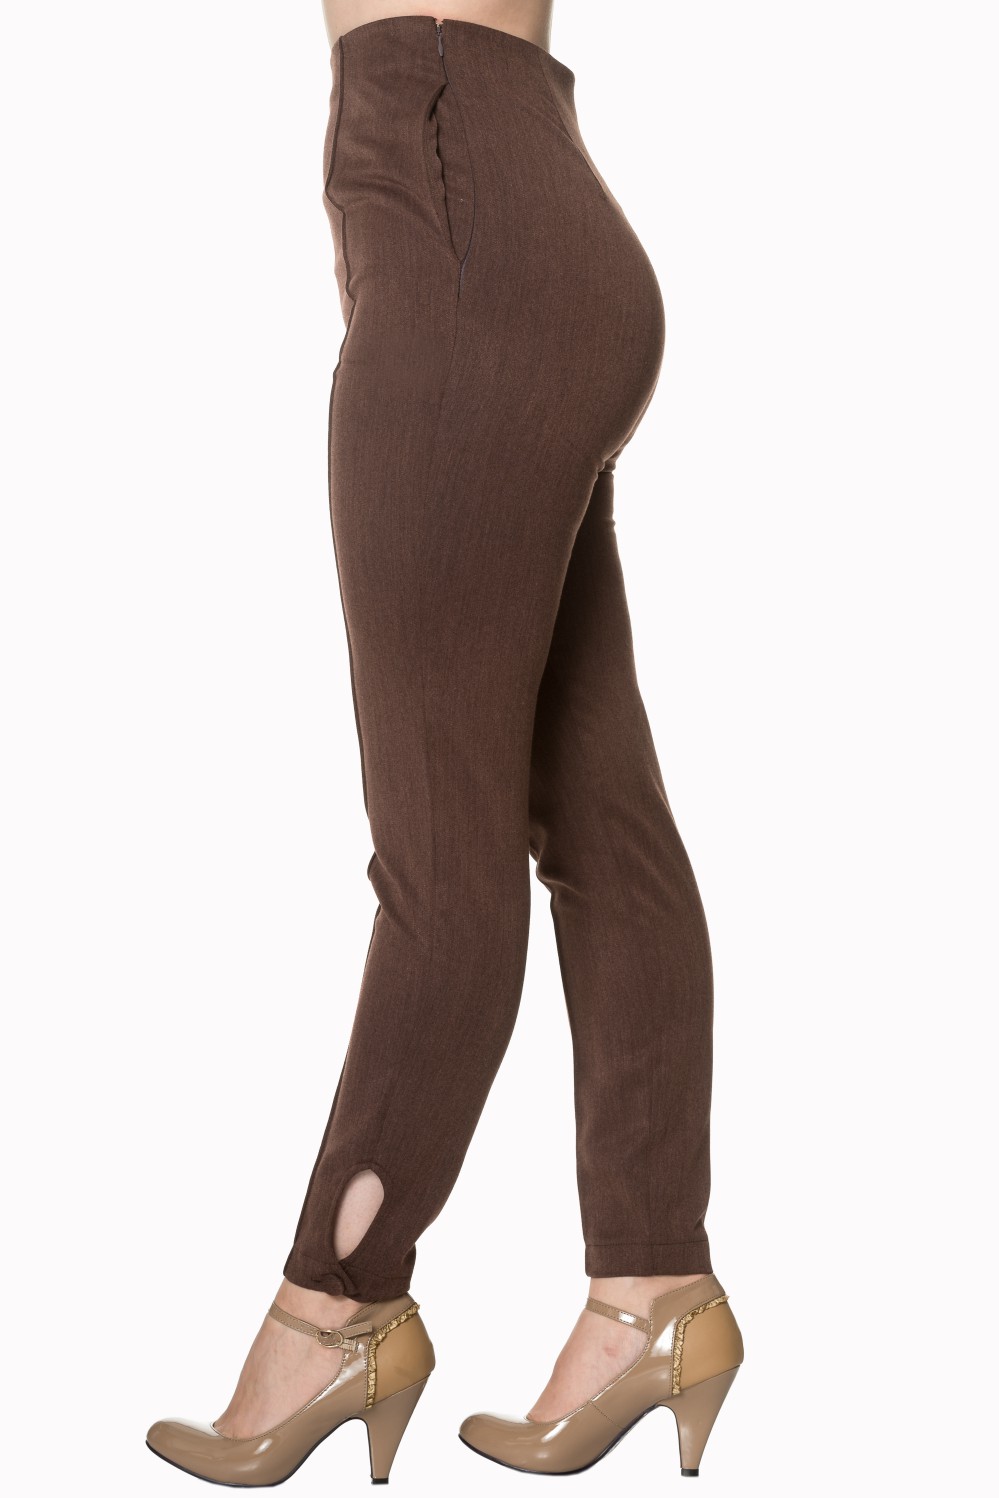 Banned Retro Tempting Fate Brown 50s Trousers